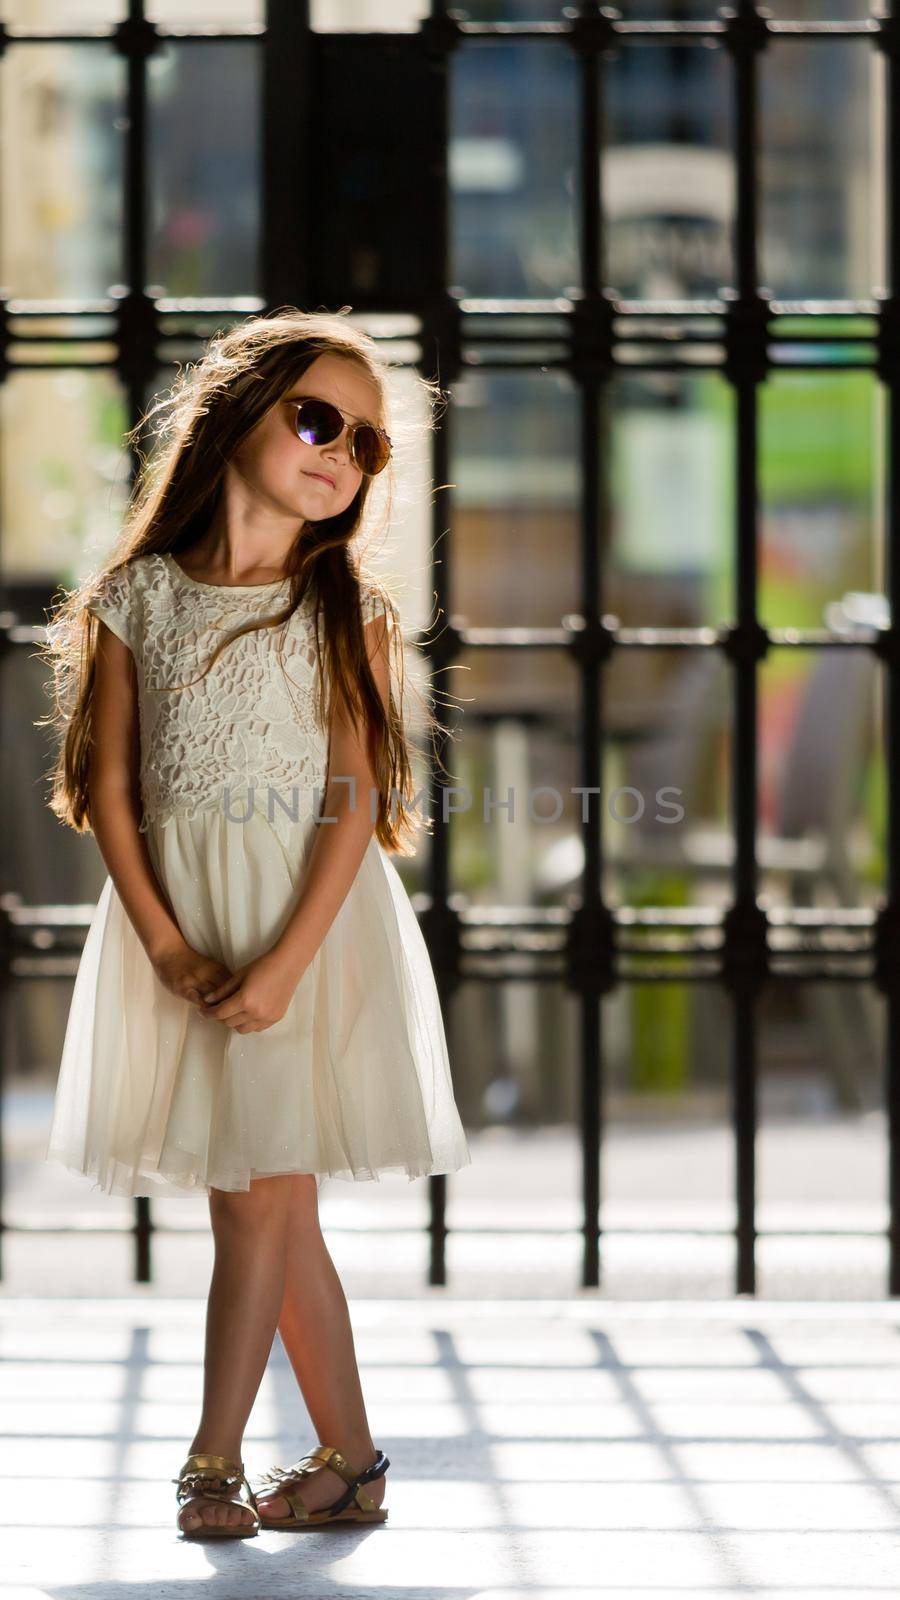 A little sweet girl in a white dress and wearing sunglasses.